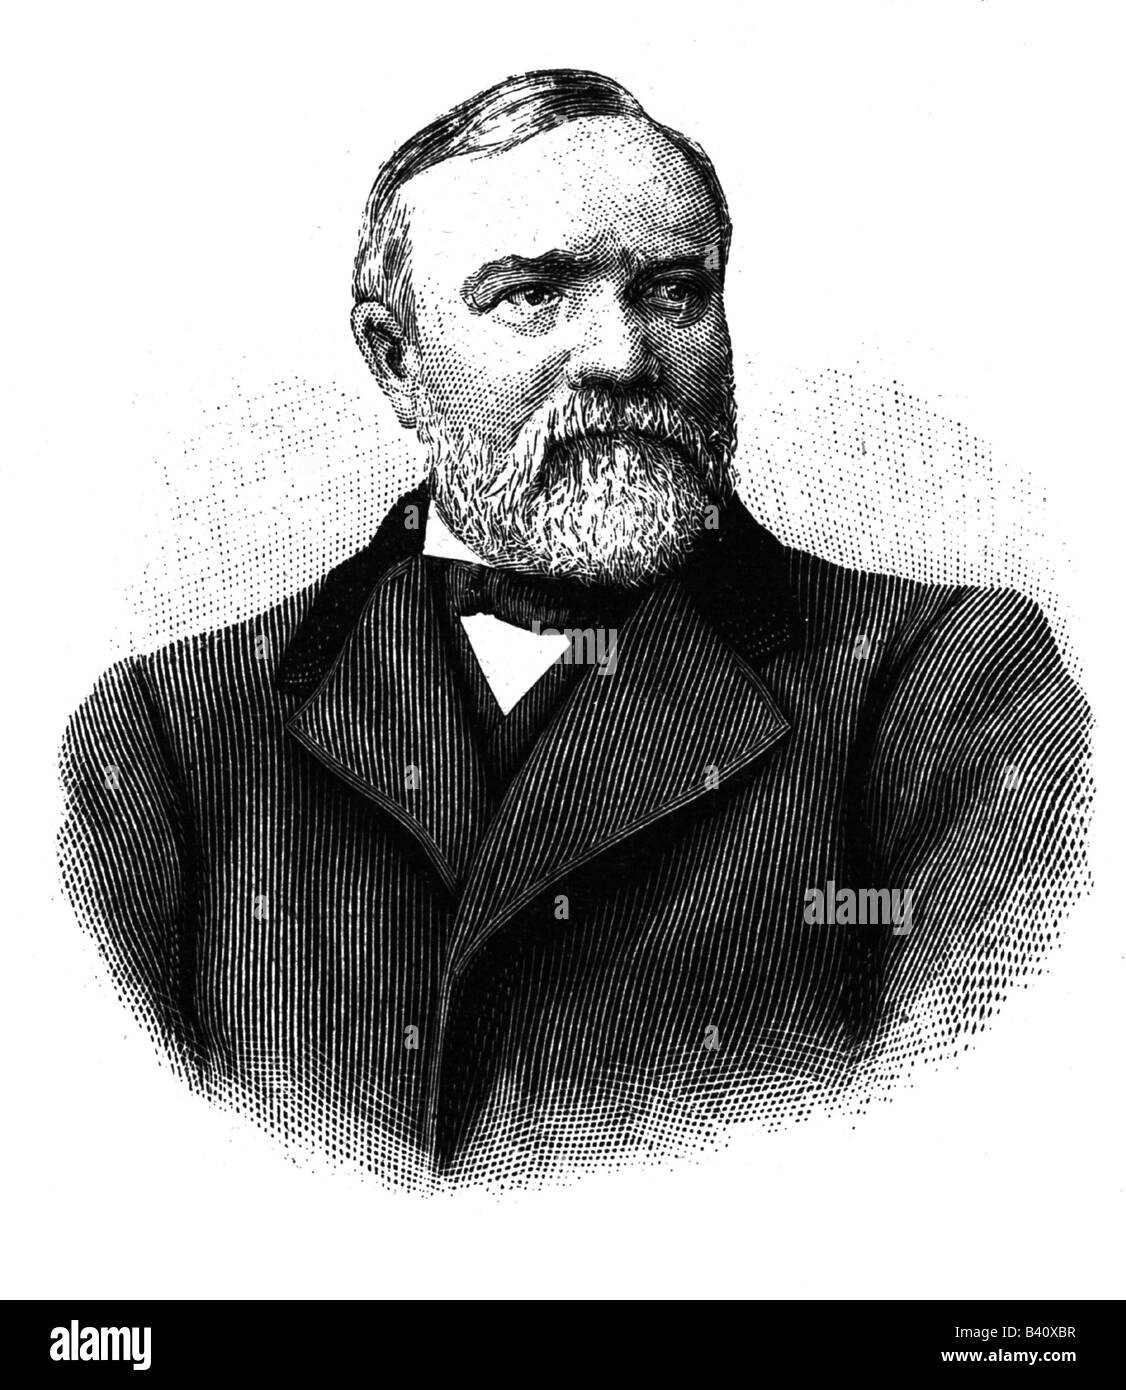 Carnegie, Andrew, 25.11.1835 - 11.8.1919, American industrialist, portrait, wood engraving, late 19th century, , Stock Photo